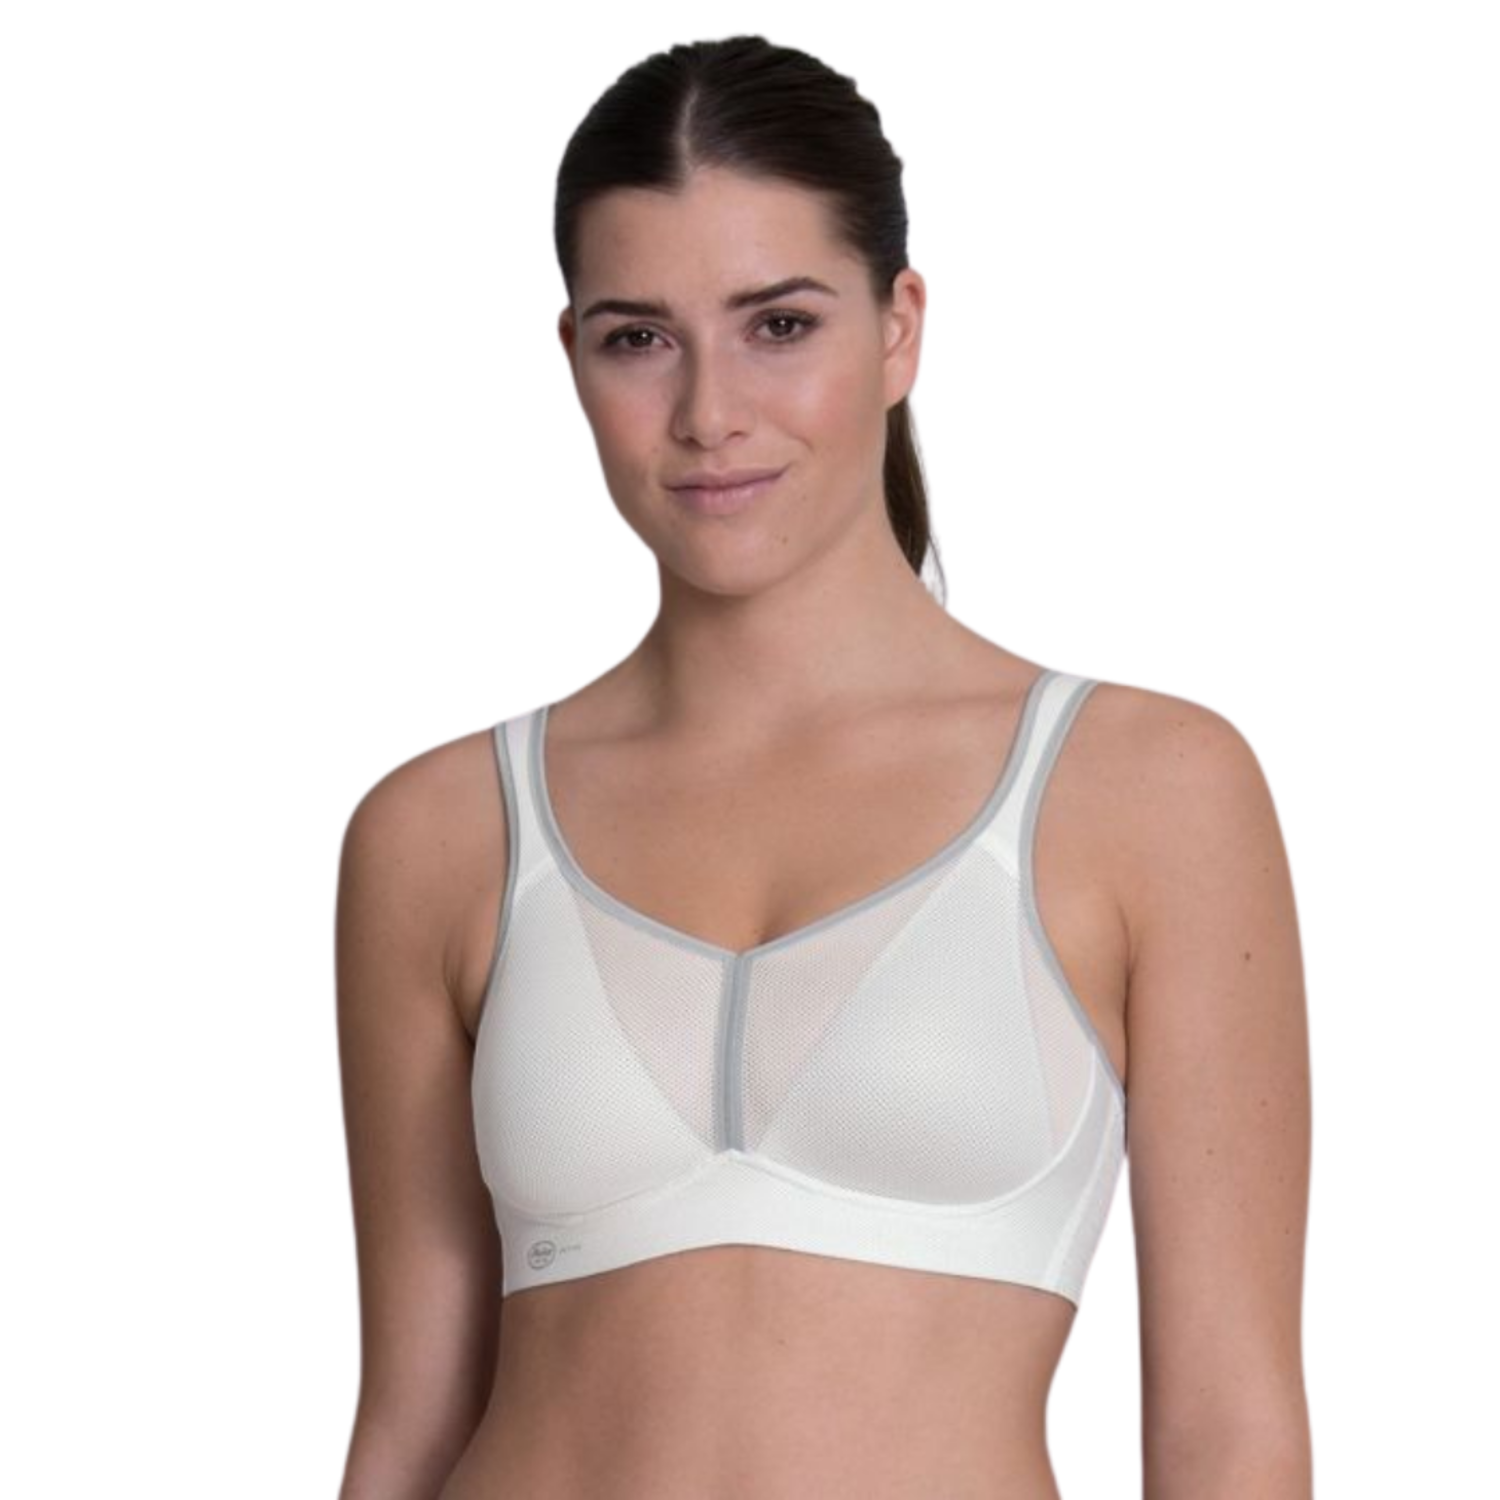 5544 Anita Air Control Sports Bra With Padded Cups - 5544 Viper Grey